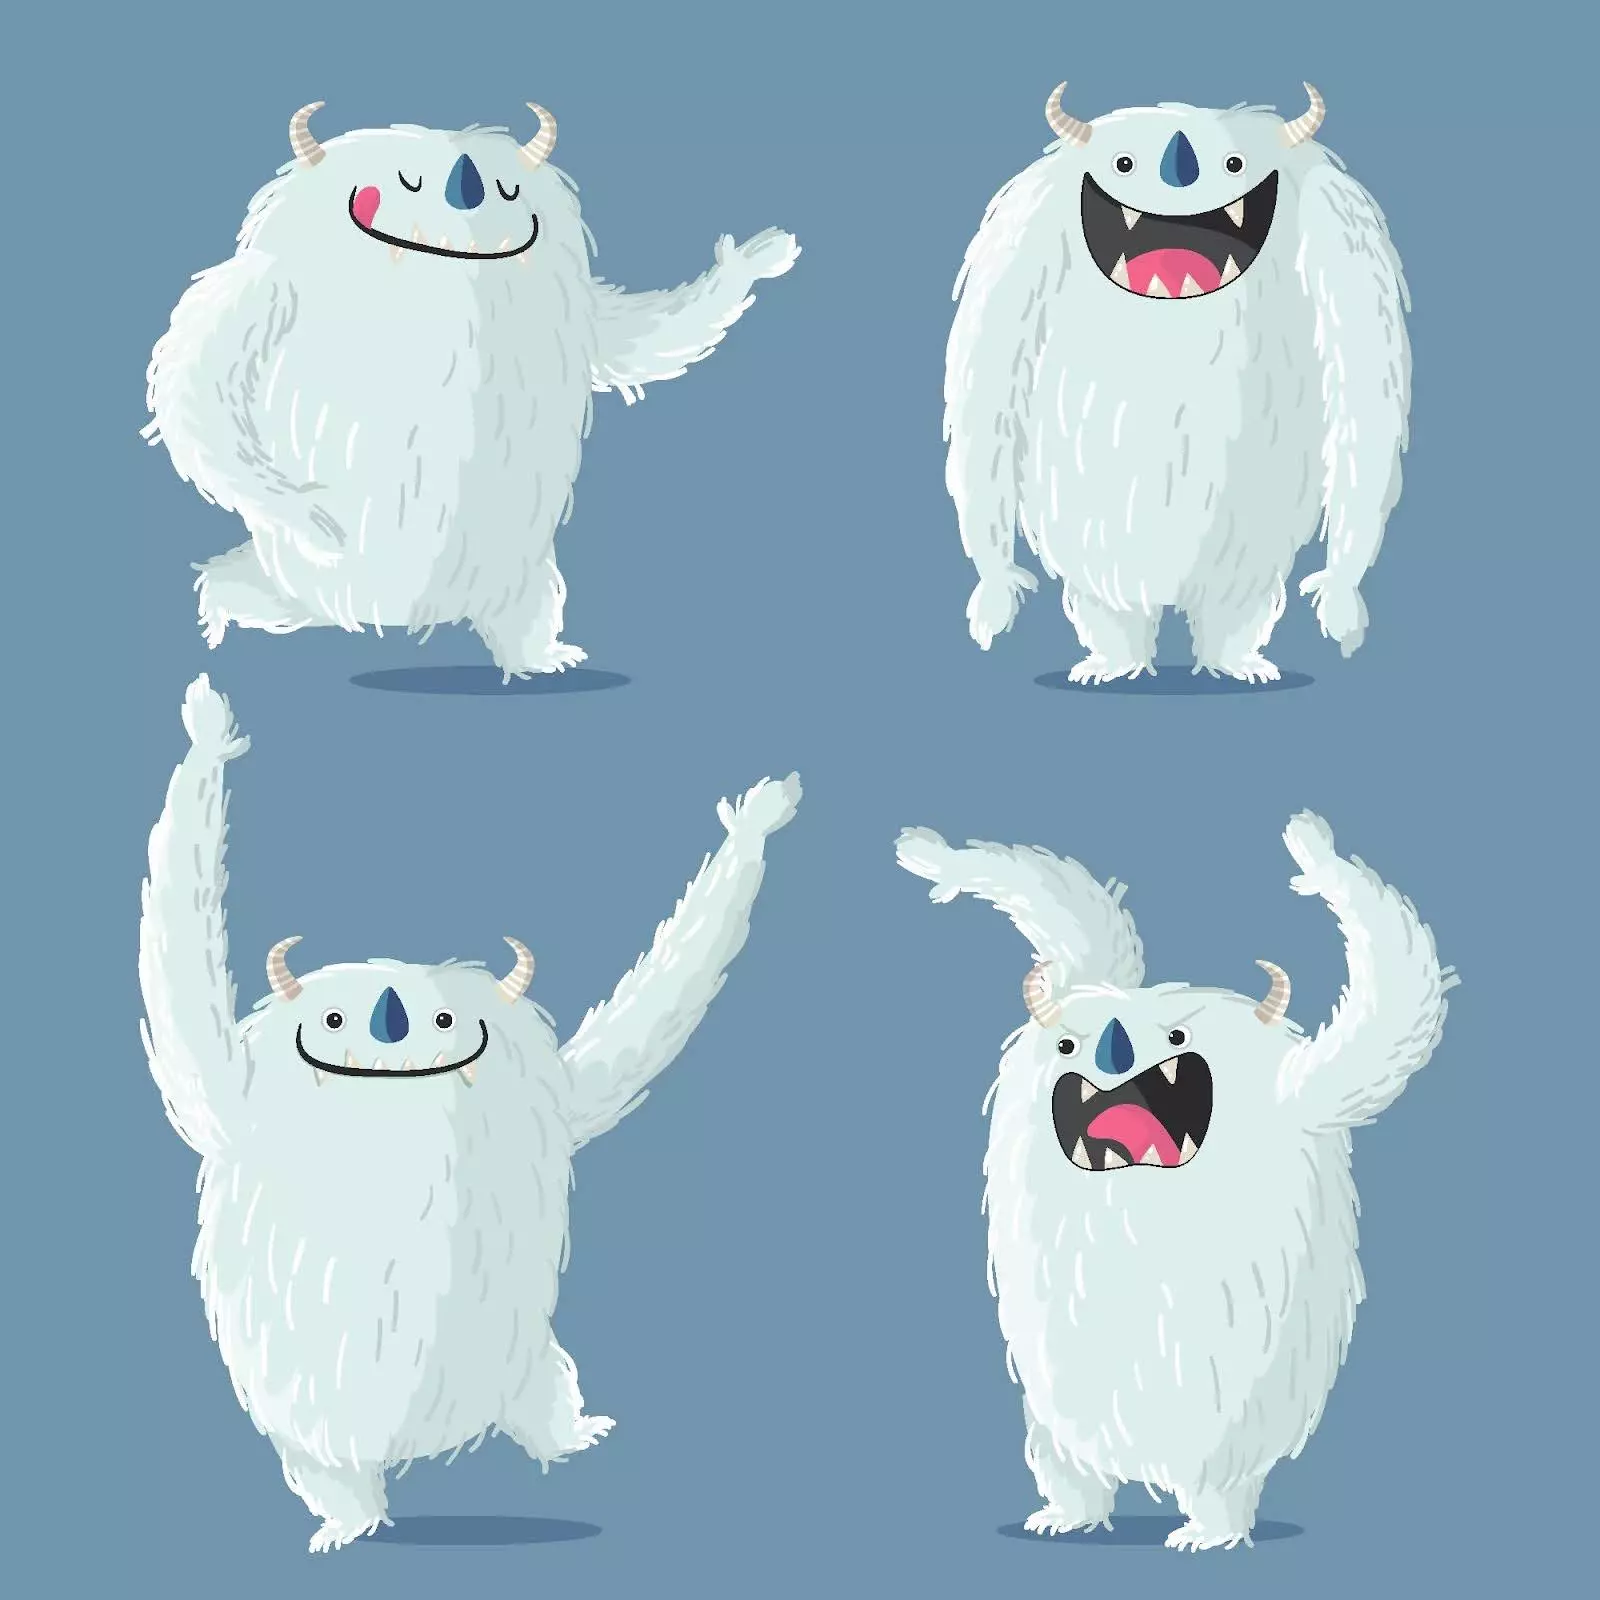 Cute monster design in different moods